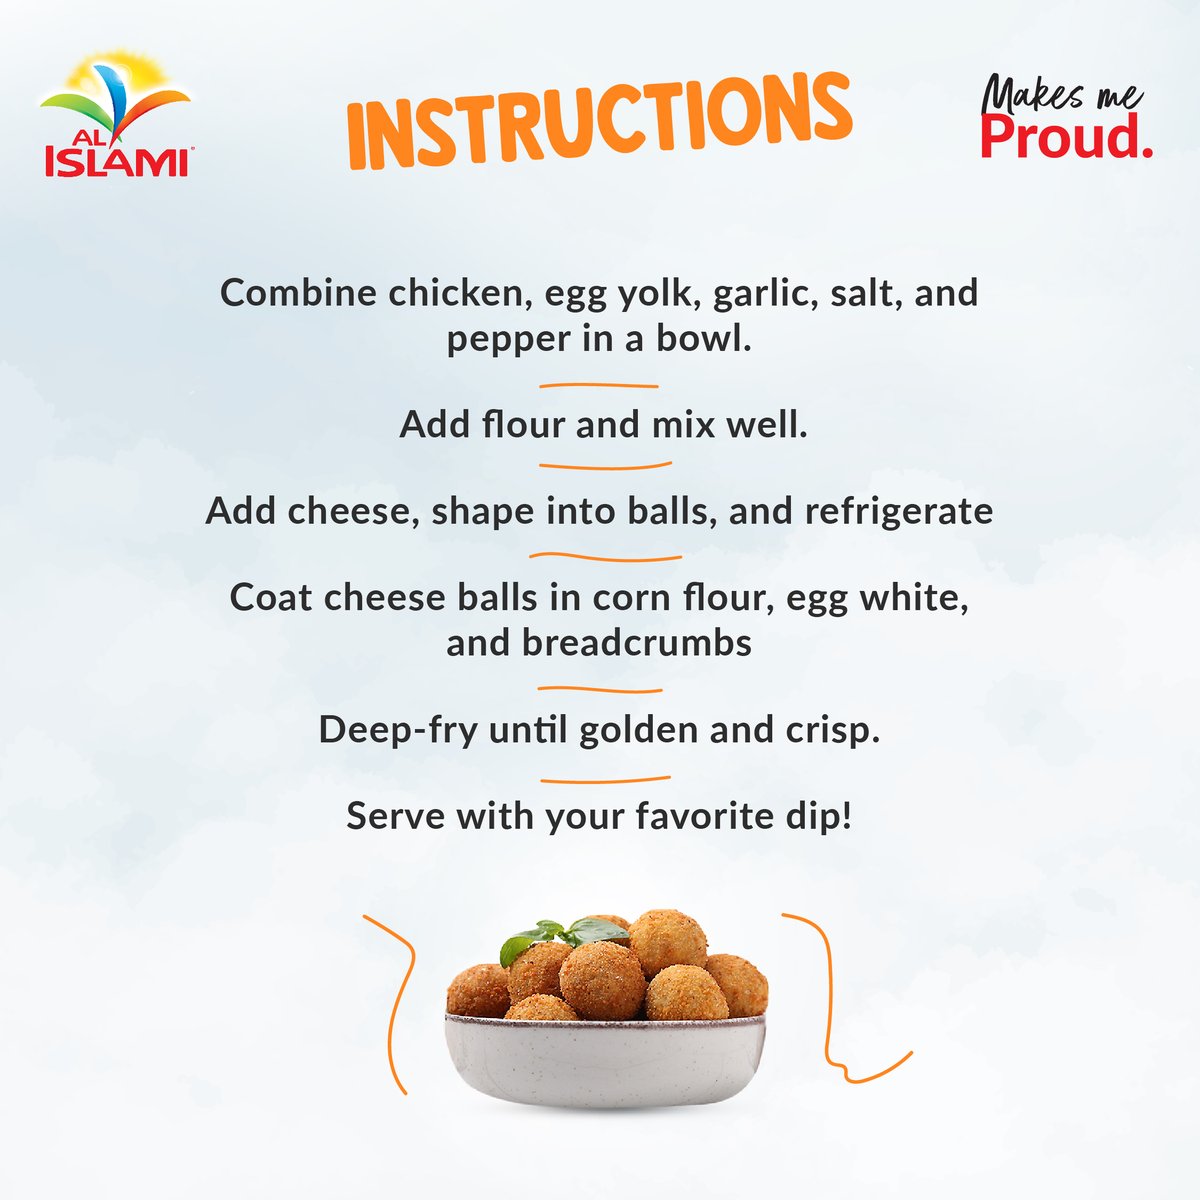 In the mood for some cheesy homemade bites? Chicken cheese balls are the best cheese-loaded snacks for movie nights with the fam! Learn how to make incredible cheese balls at home by following our recipe!

#MakesMeProud #AlIslamiFoods #ChickenMince #Chicken #ChickenCheeseBalls